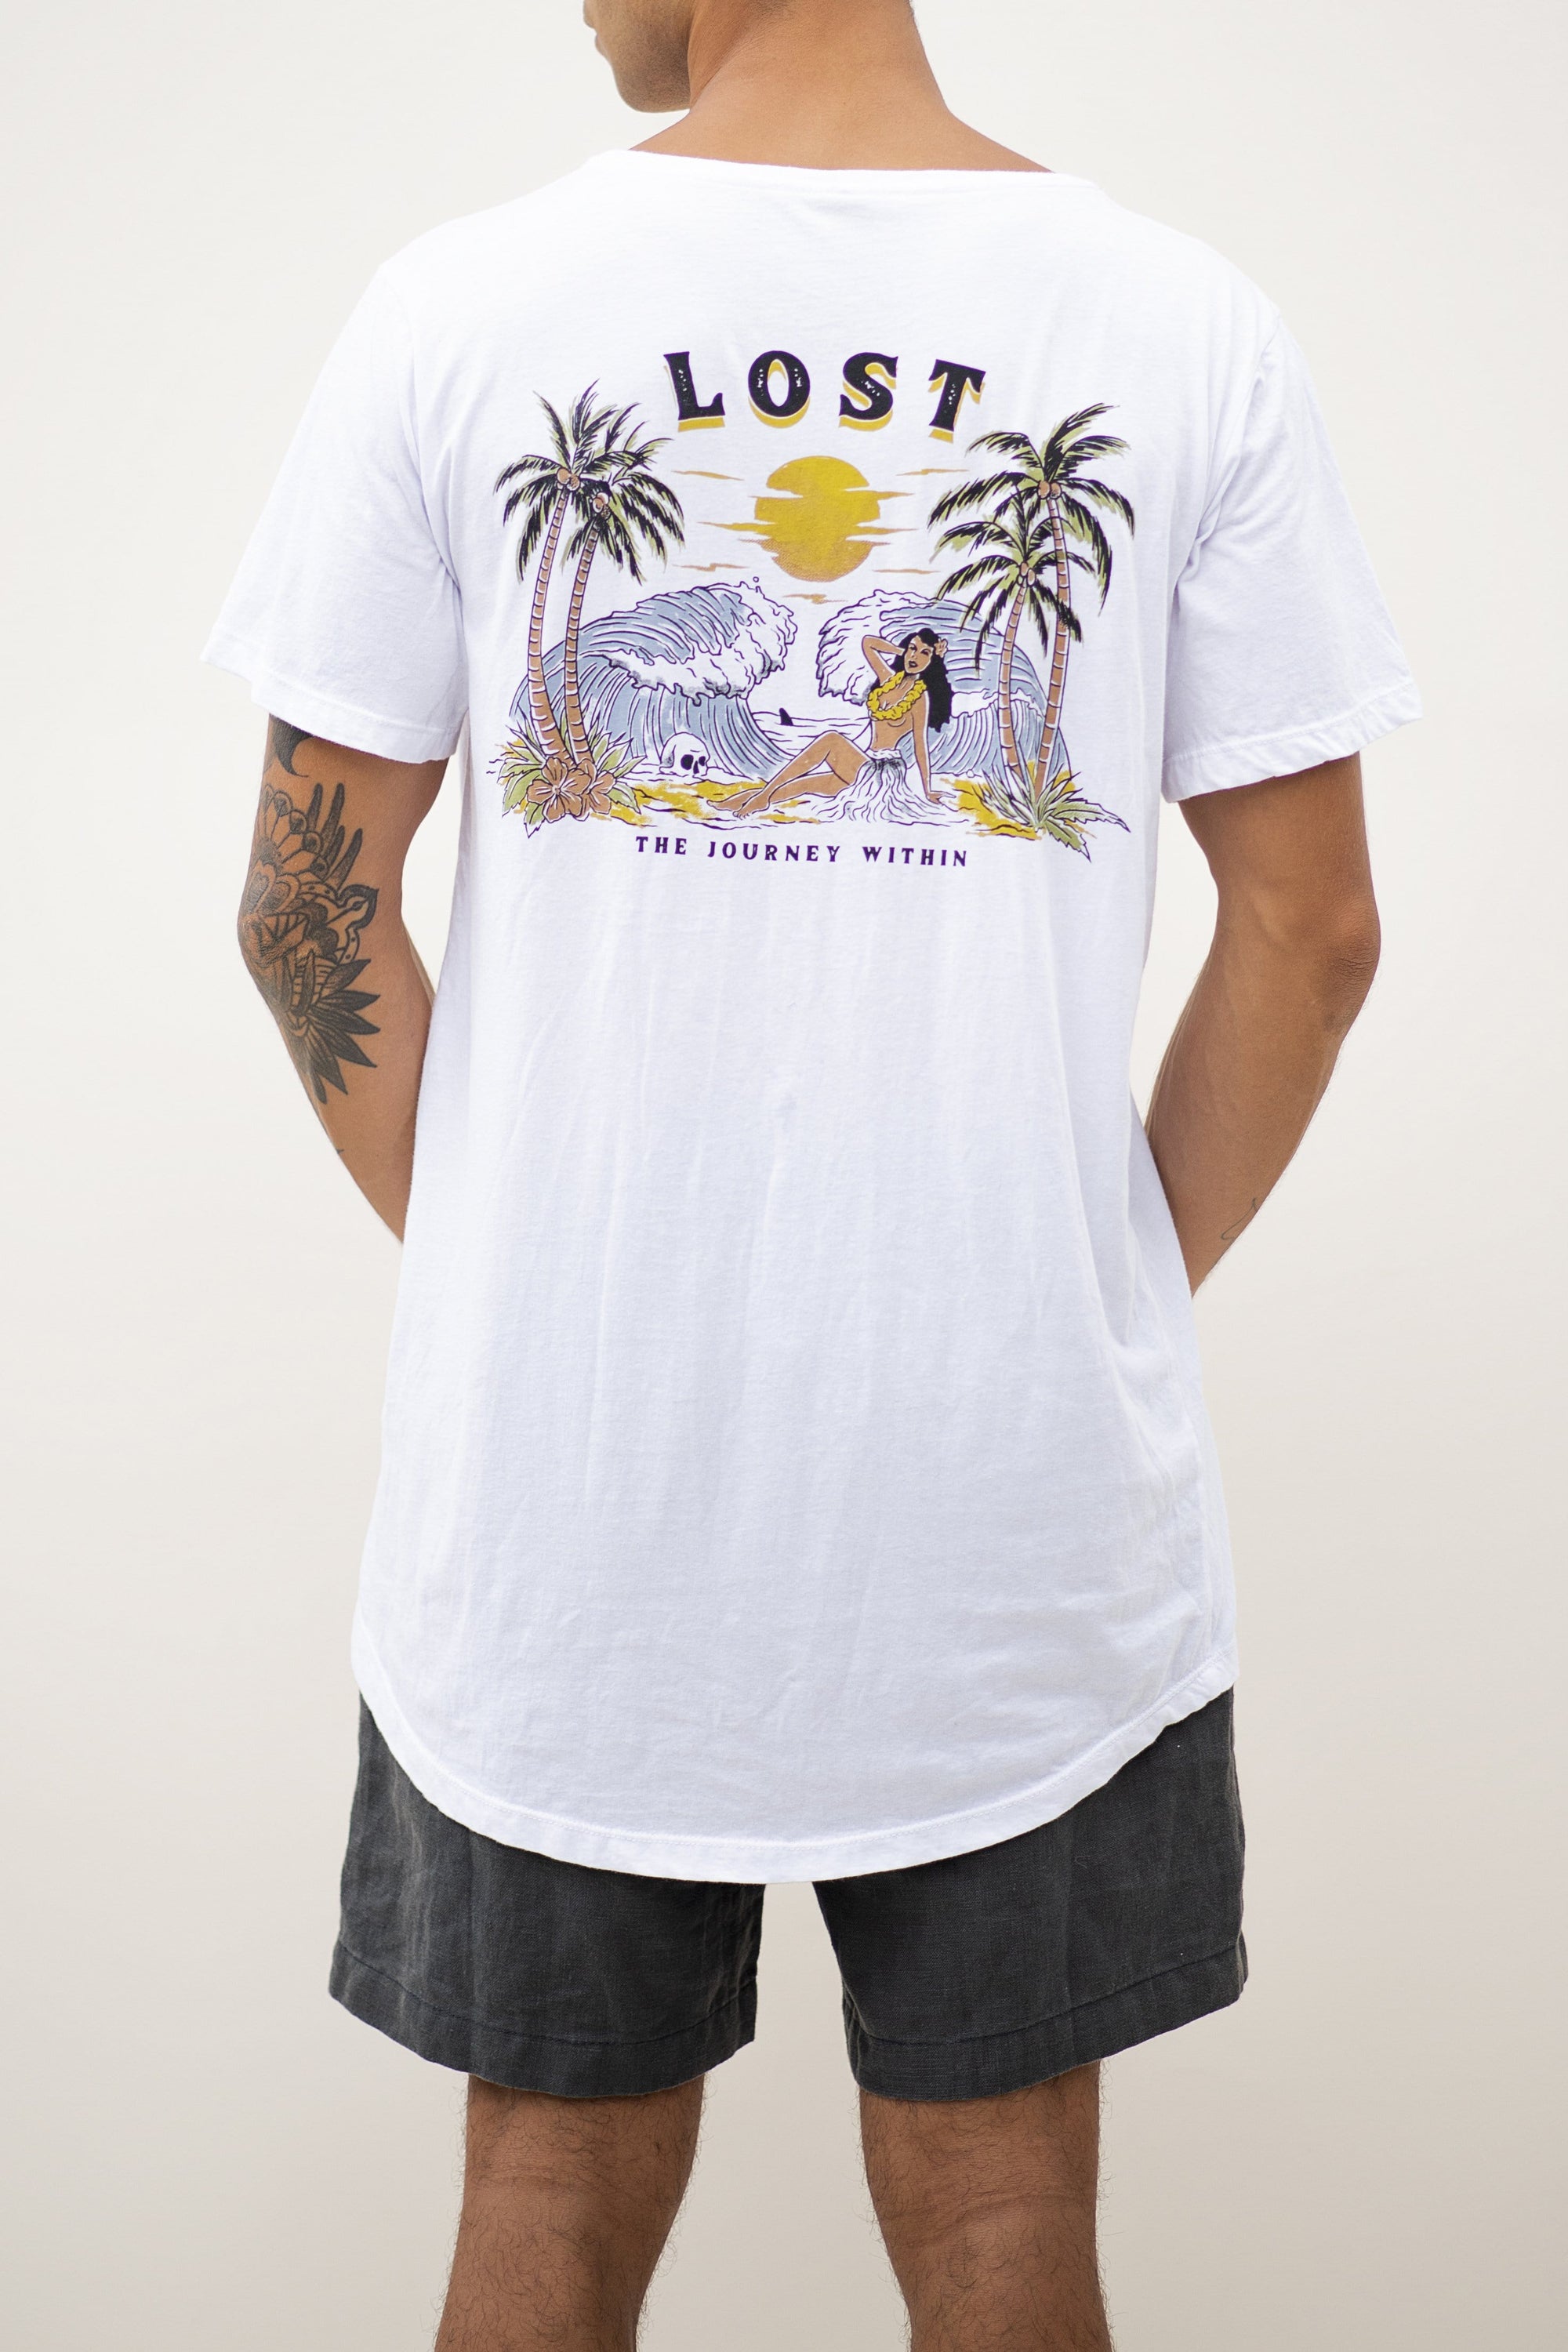 Ts The Journey Within - Man T-Shirt - LOST IN PARADISE